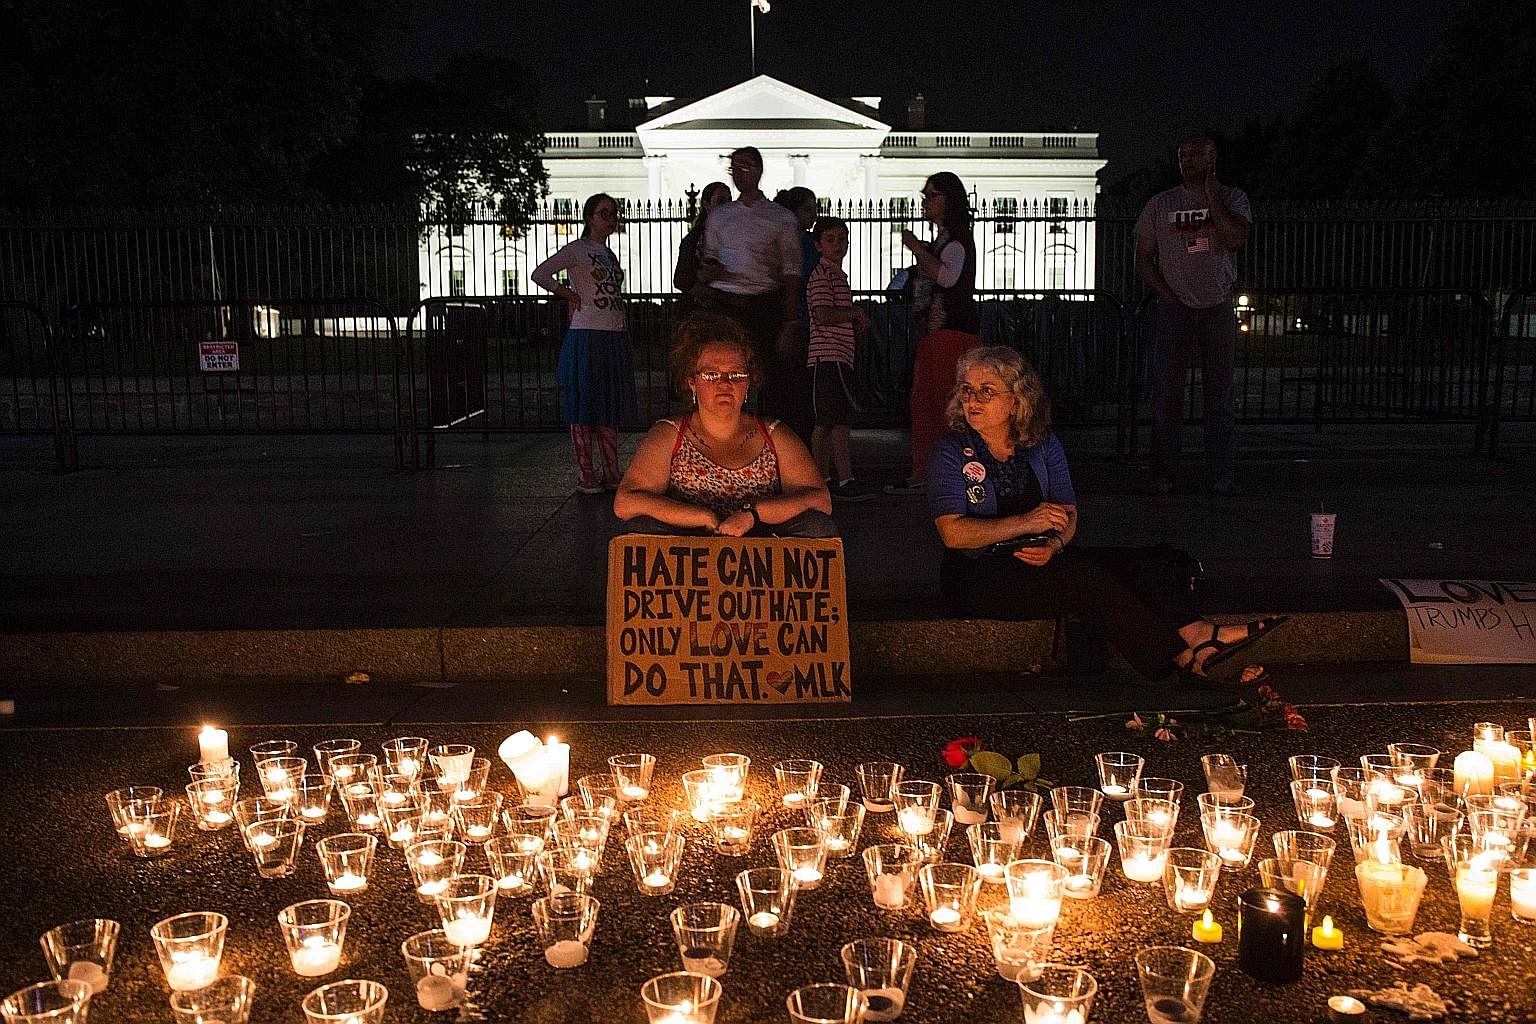 People gathering in front of the White House on Sunday for a vigil in response to the deadly violence at the Aug 12 rally in Charlottesville. Over the past week, Mr Donald Trump has indulged in nuclear brinkmanship with North Korea and flirted with w